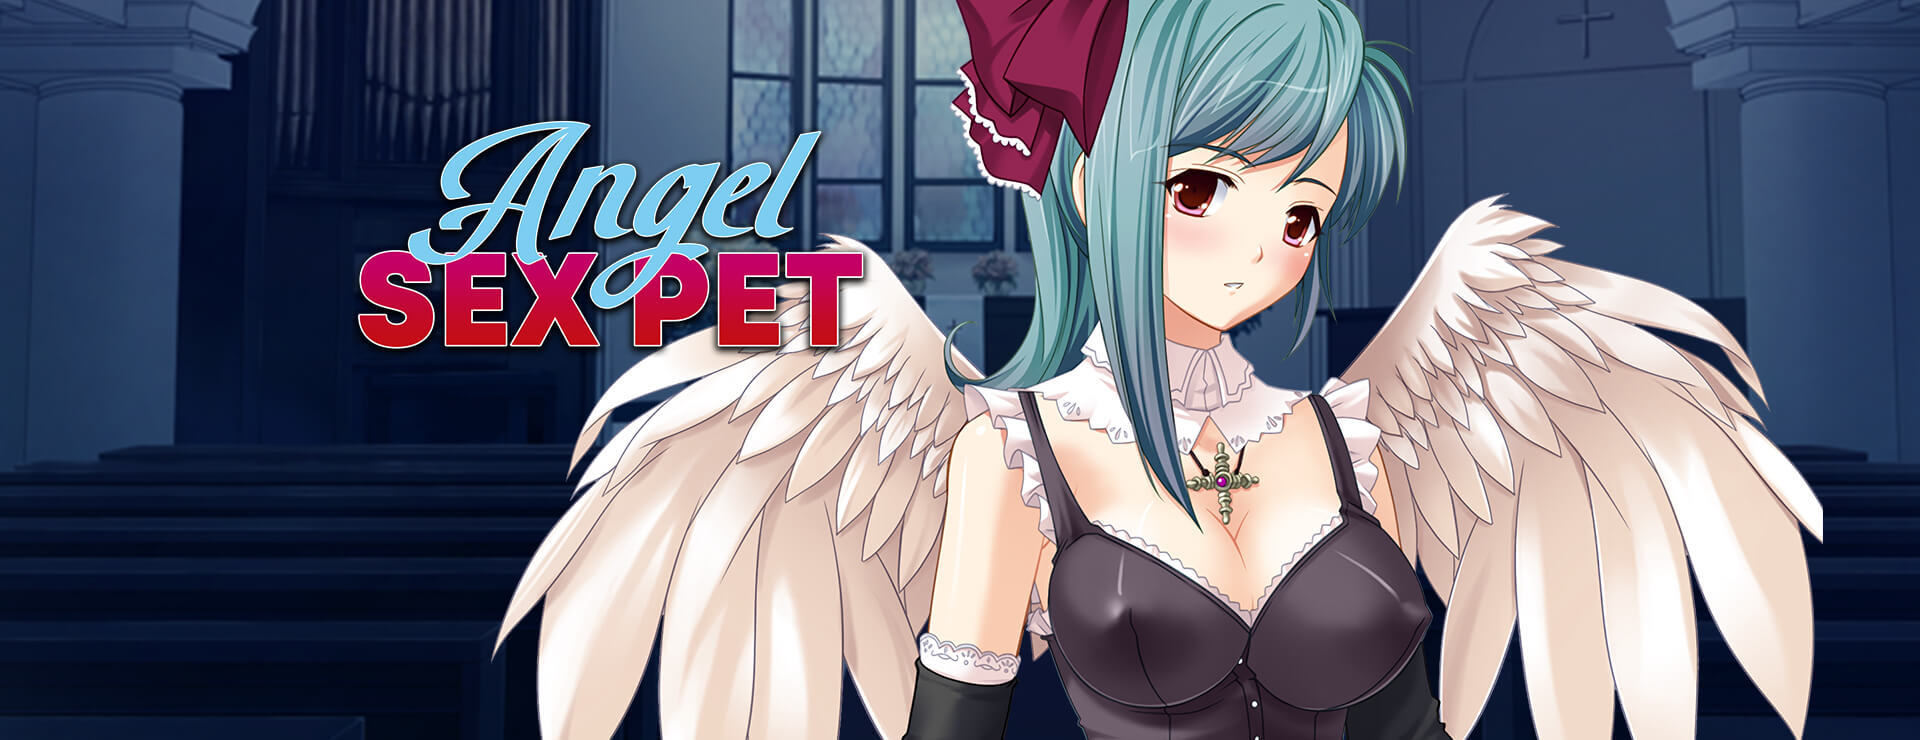 Angel Sex Pet - free porn game download, adult nsfw games for free photo